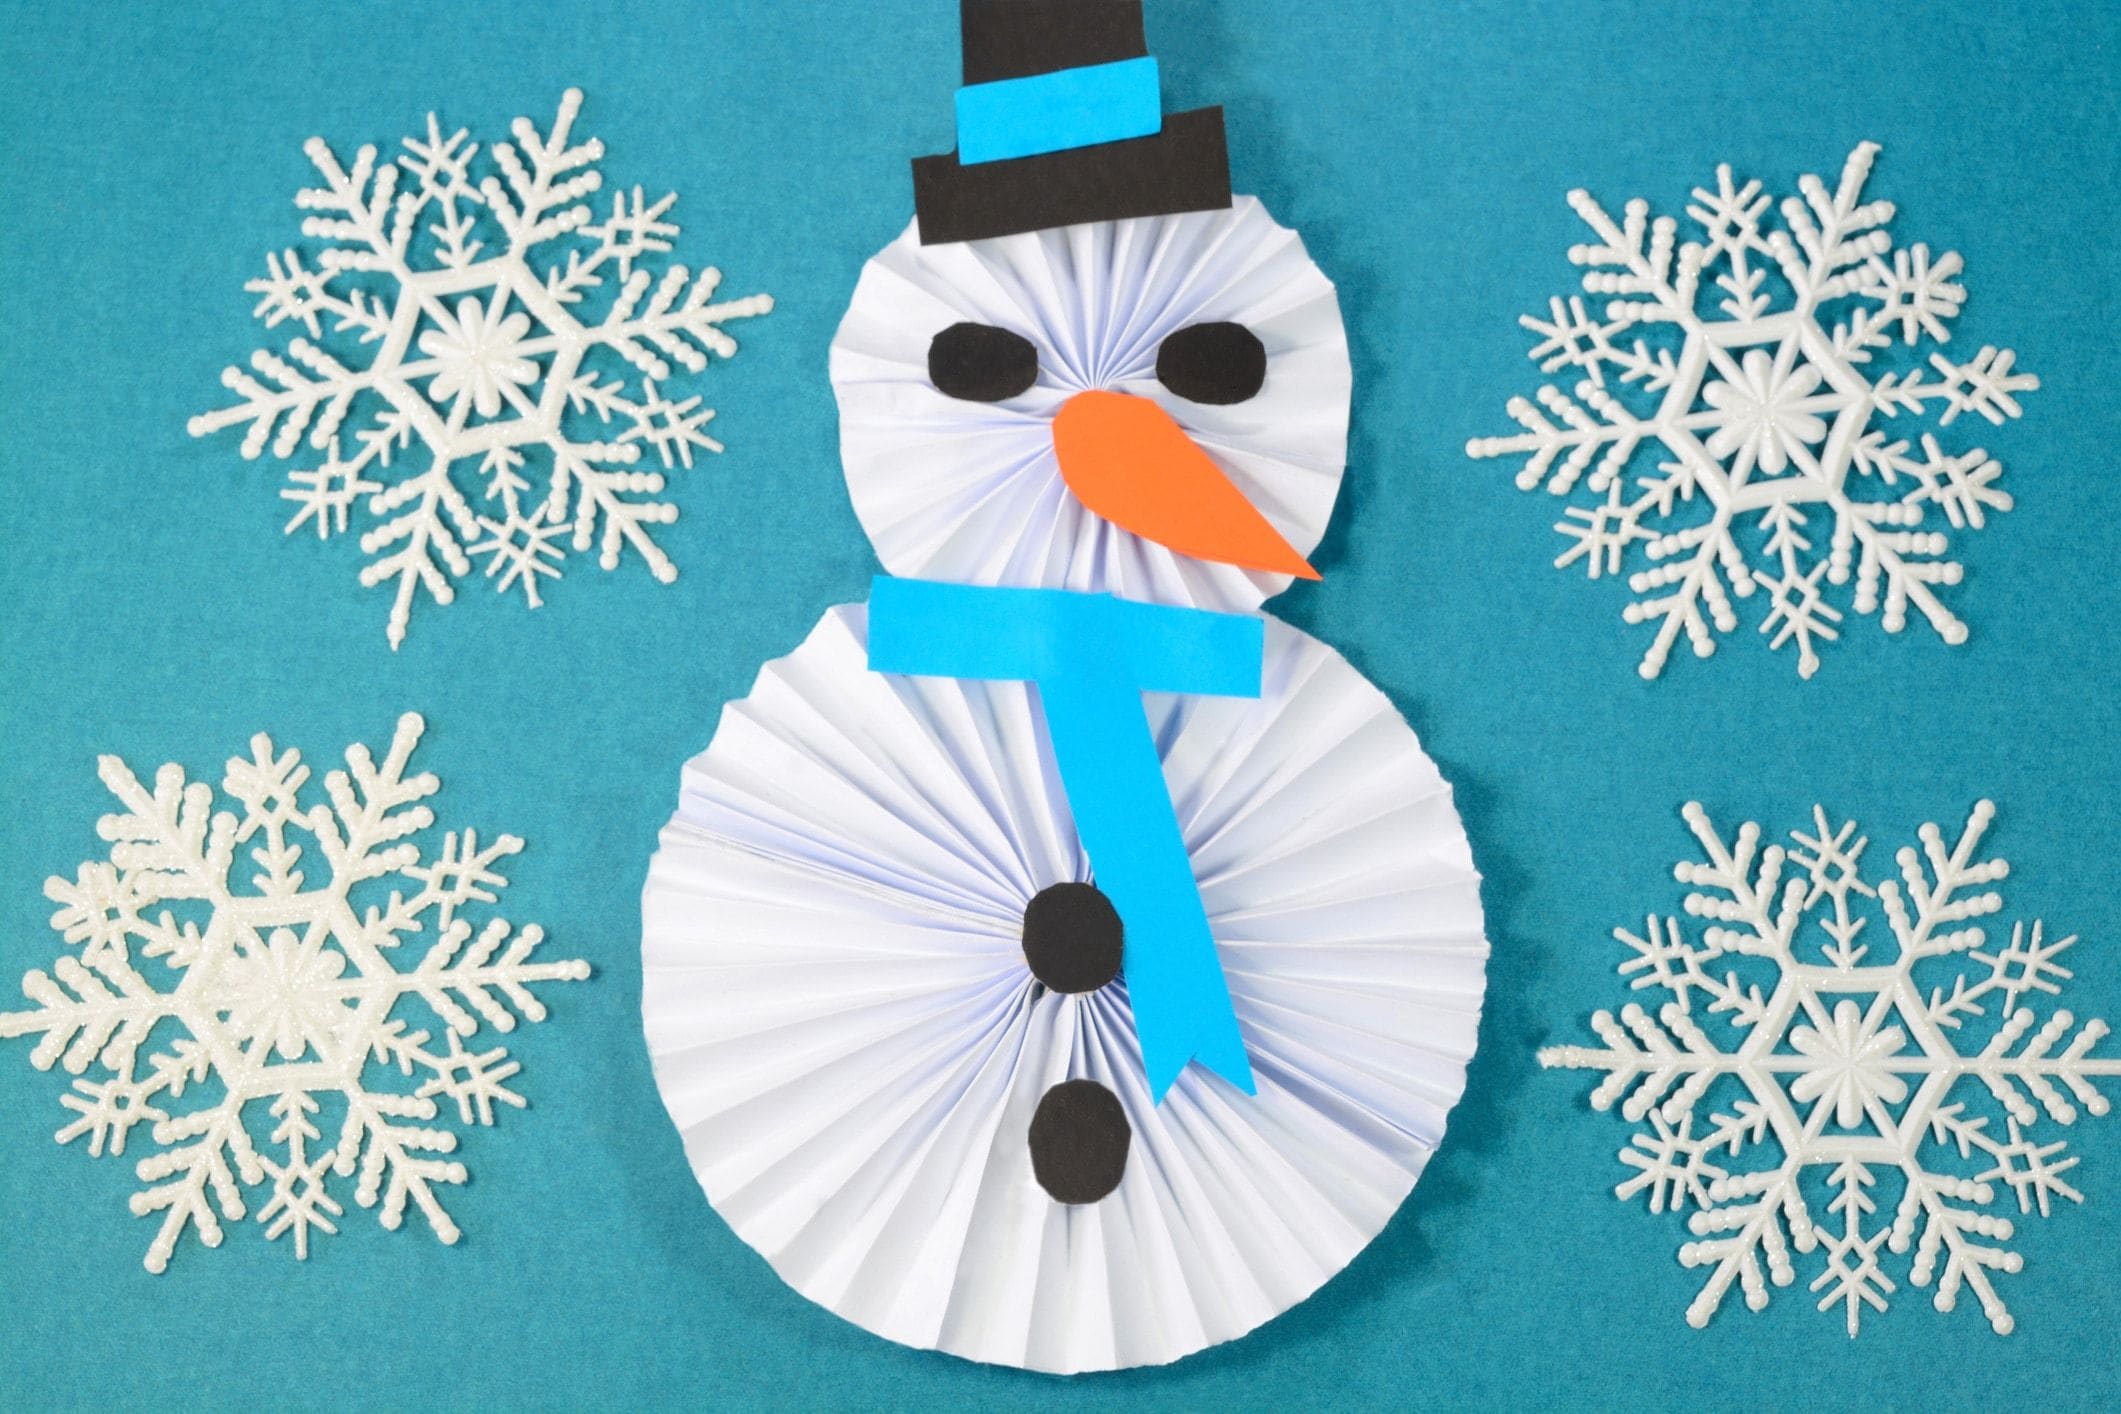 50 Fun and Easy Winter Crafts for Kids to Make - Taming Little